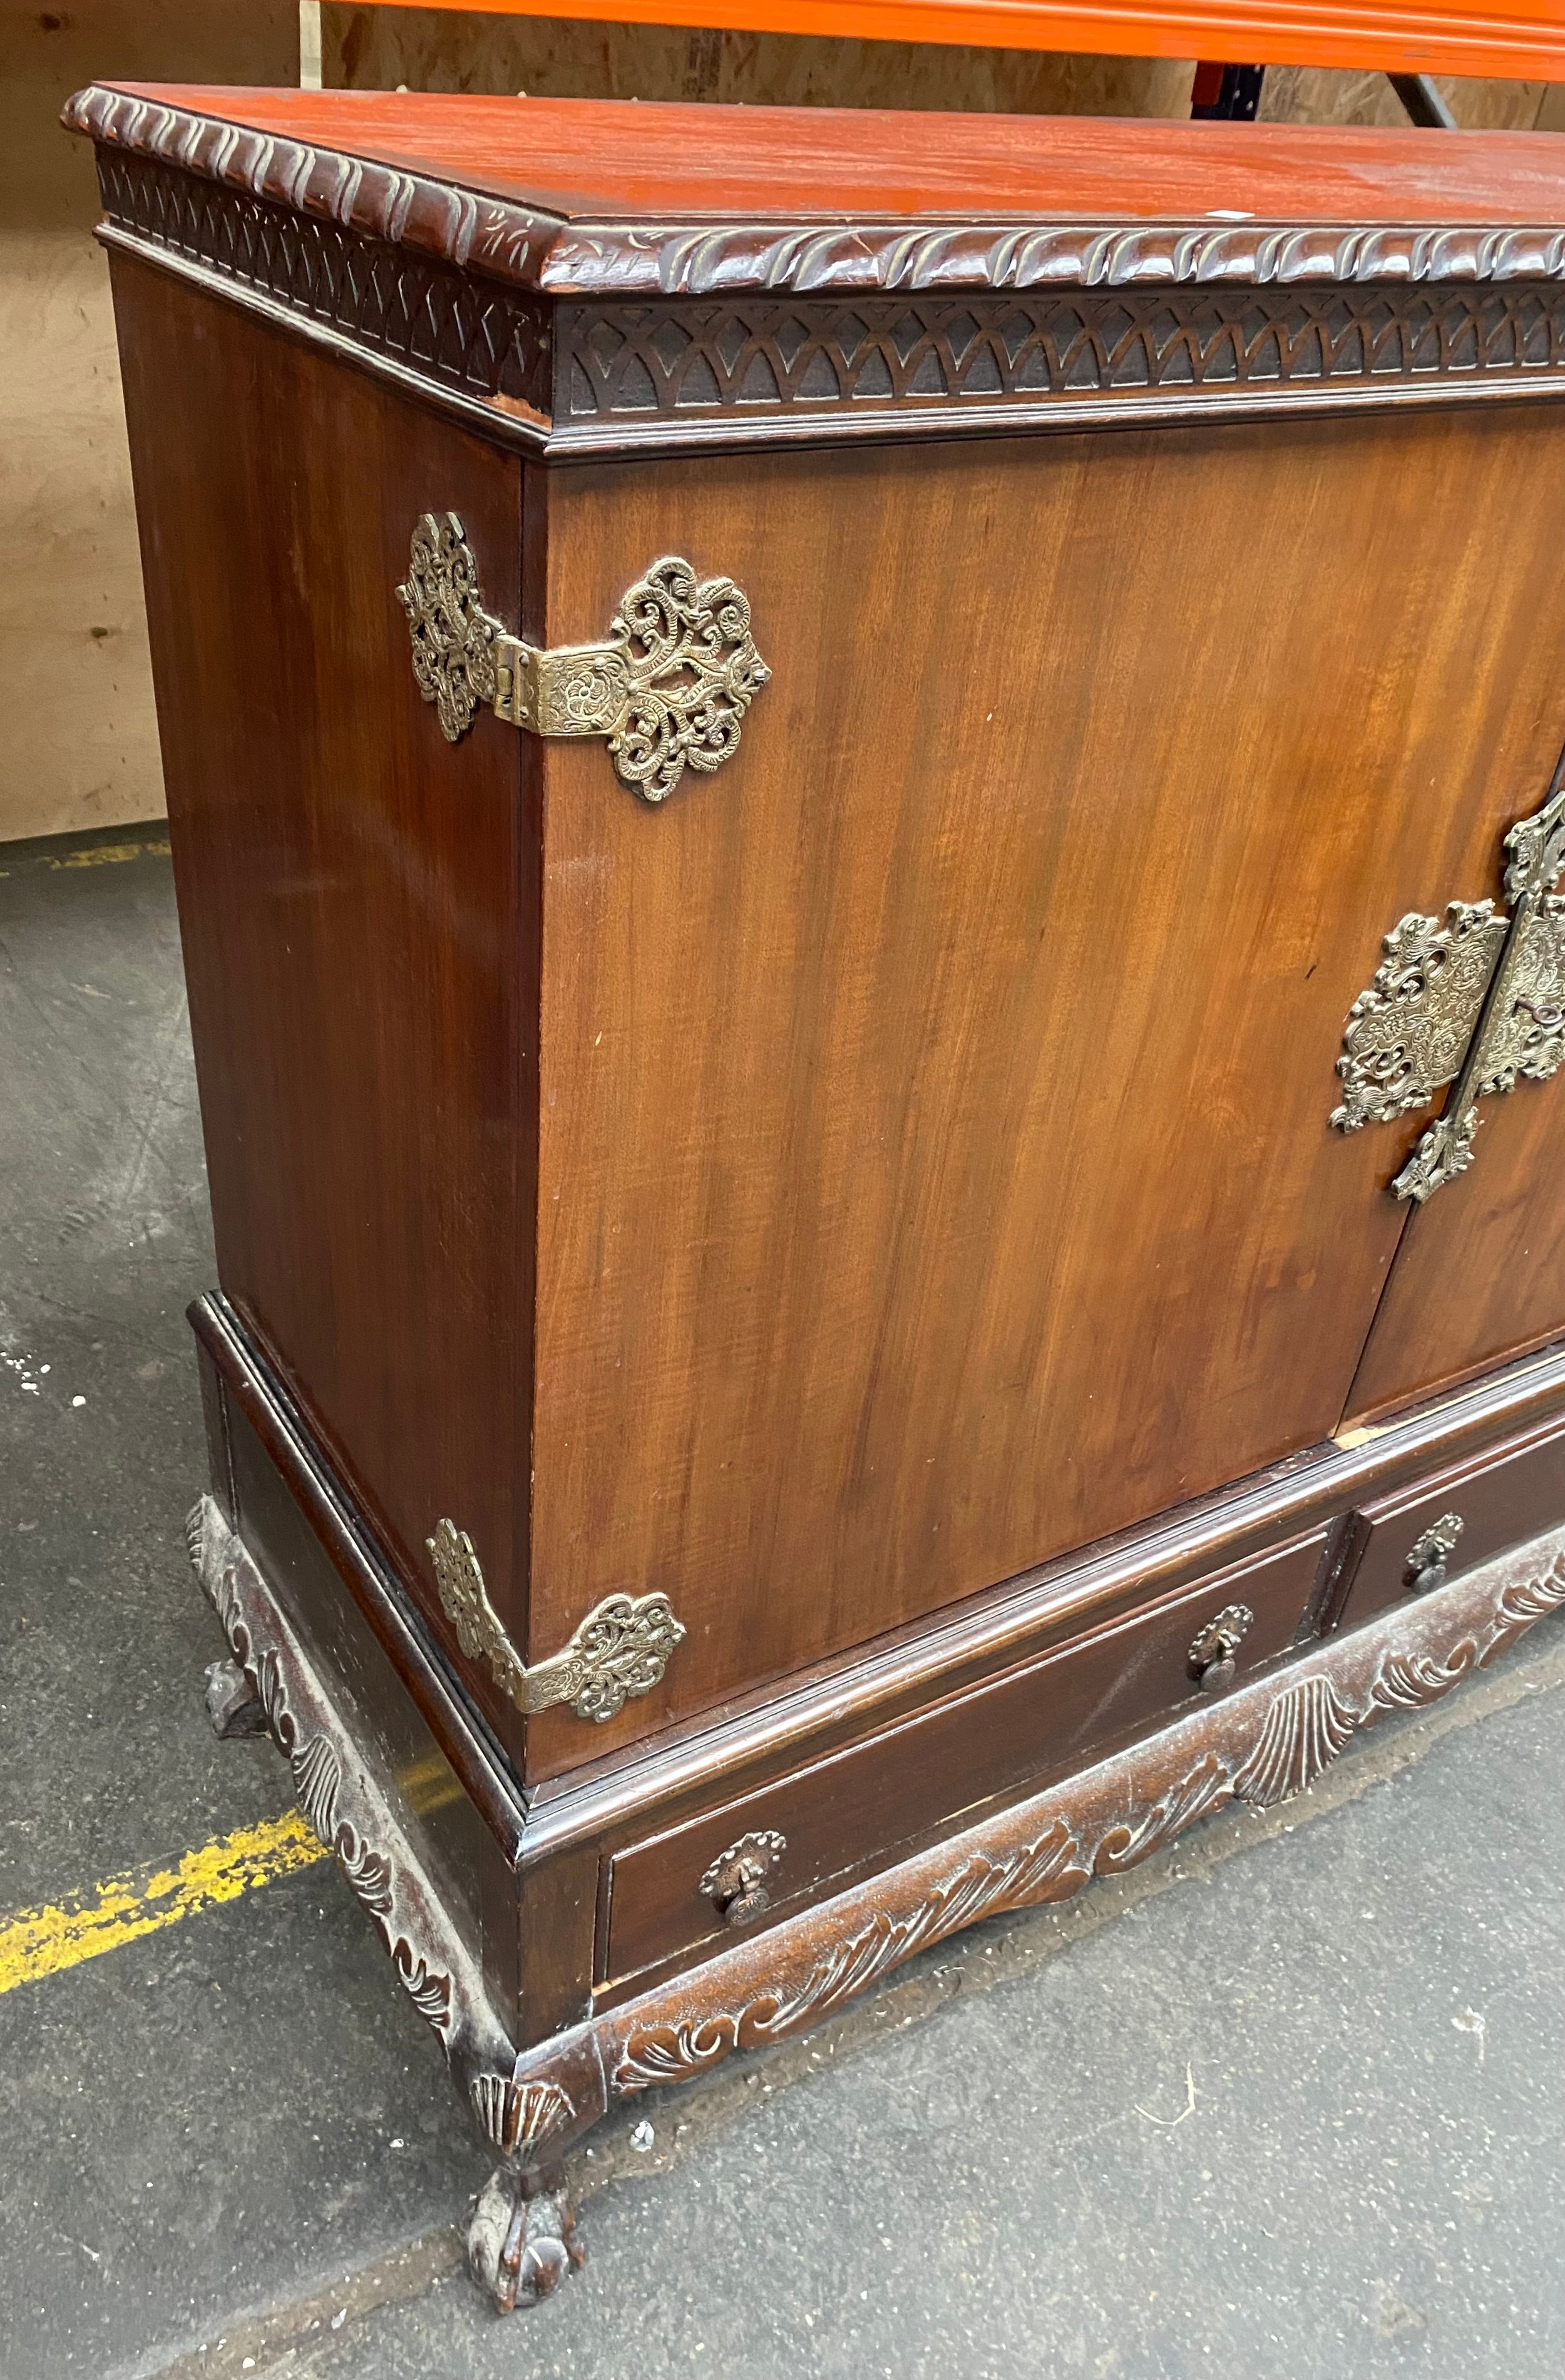 Eastern 2 door mahogany wood cabinet with brass fittings [117x52x113.5cm] - Image 4 of 4